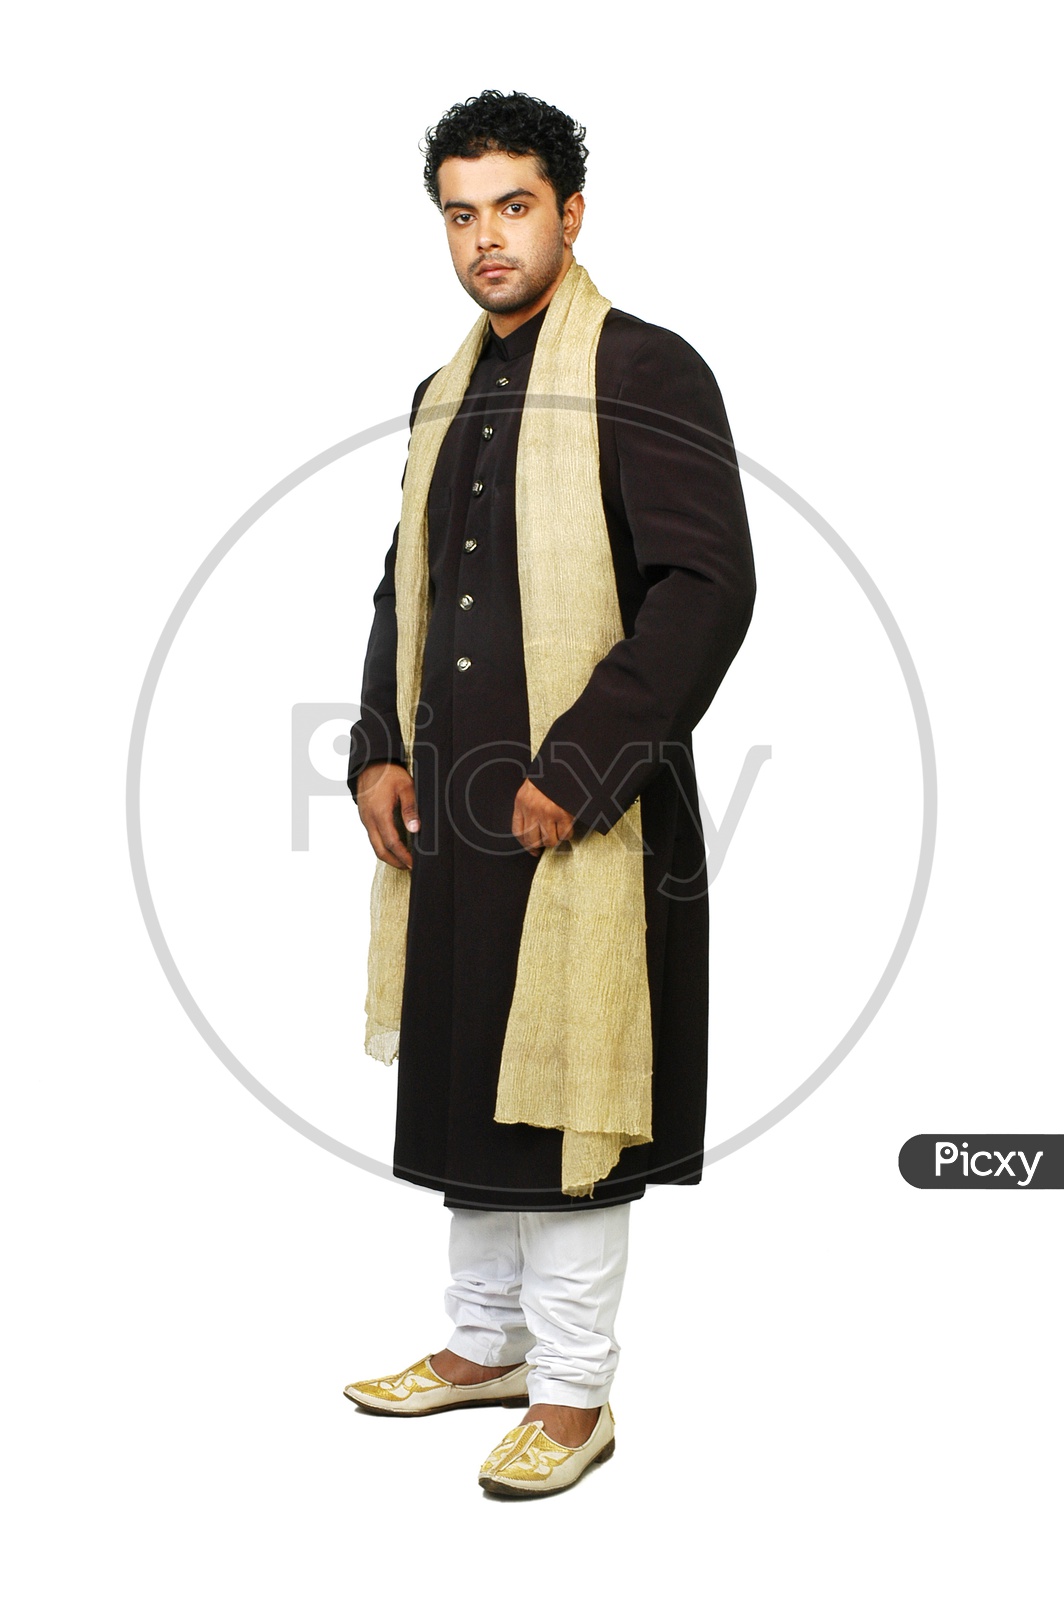 A male model posing with a Indian traditional wear - sherwani